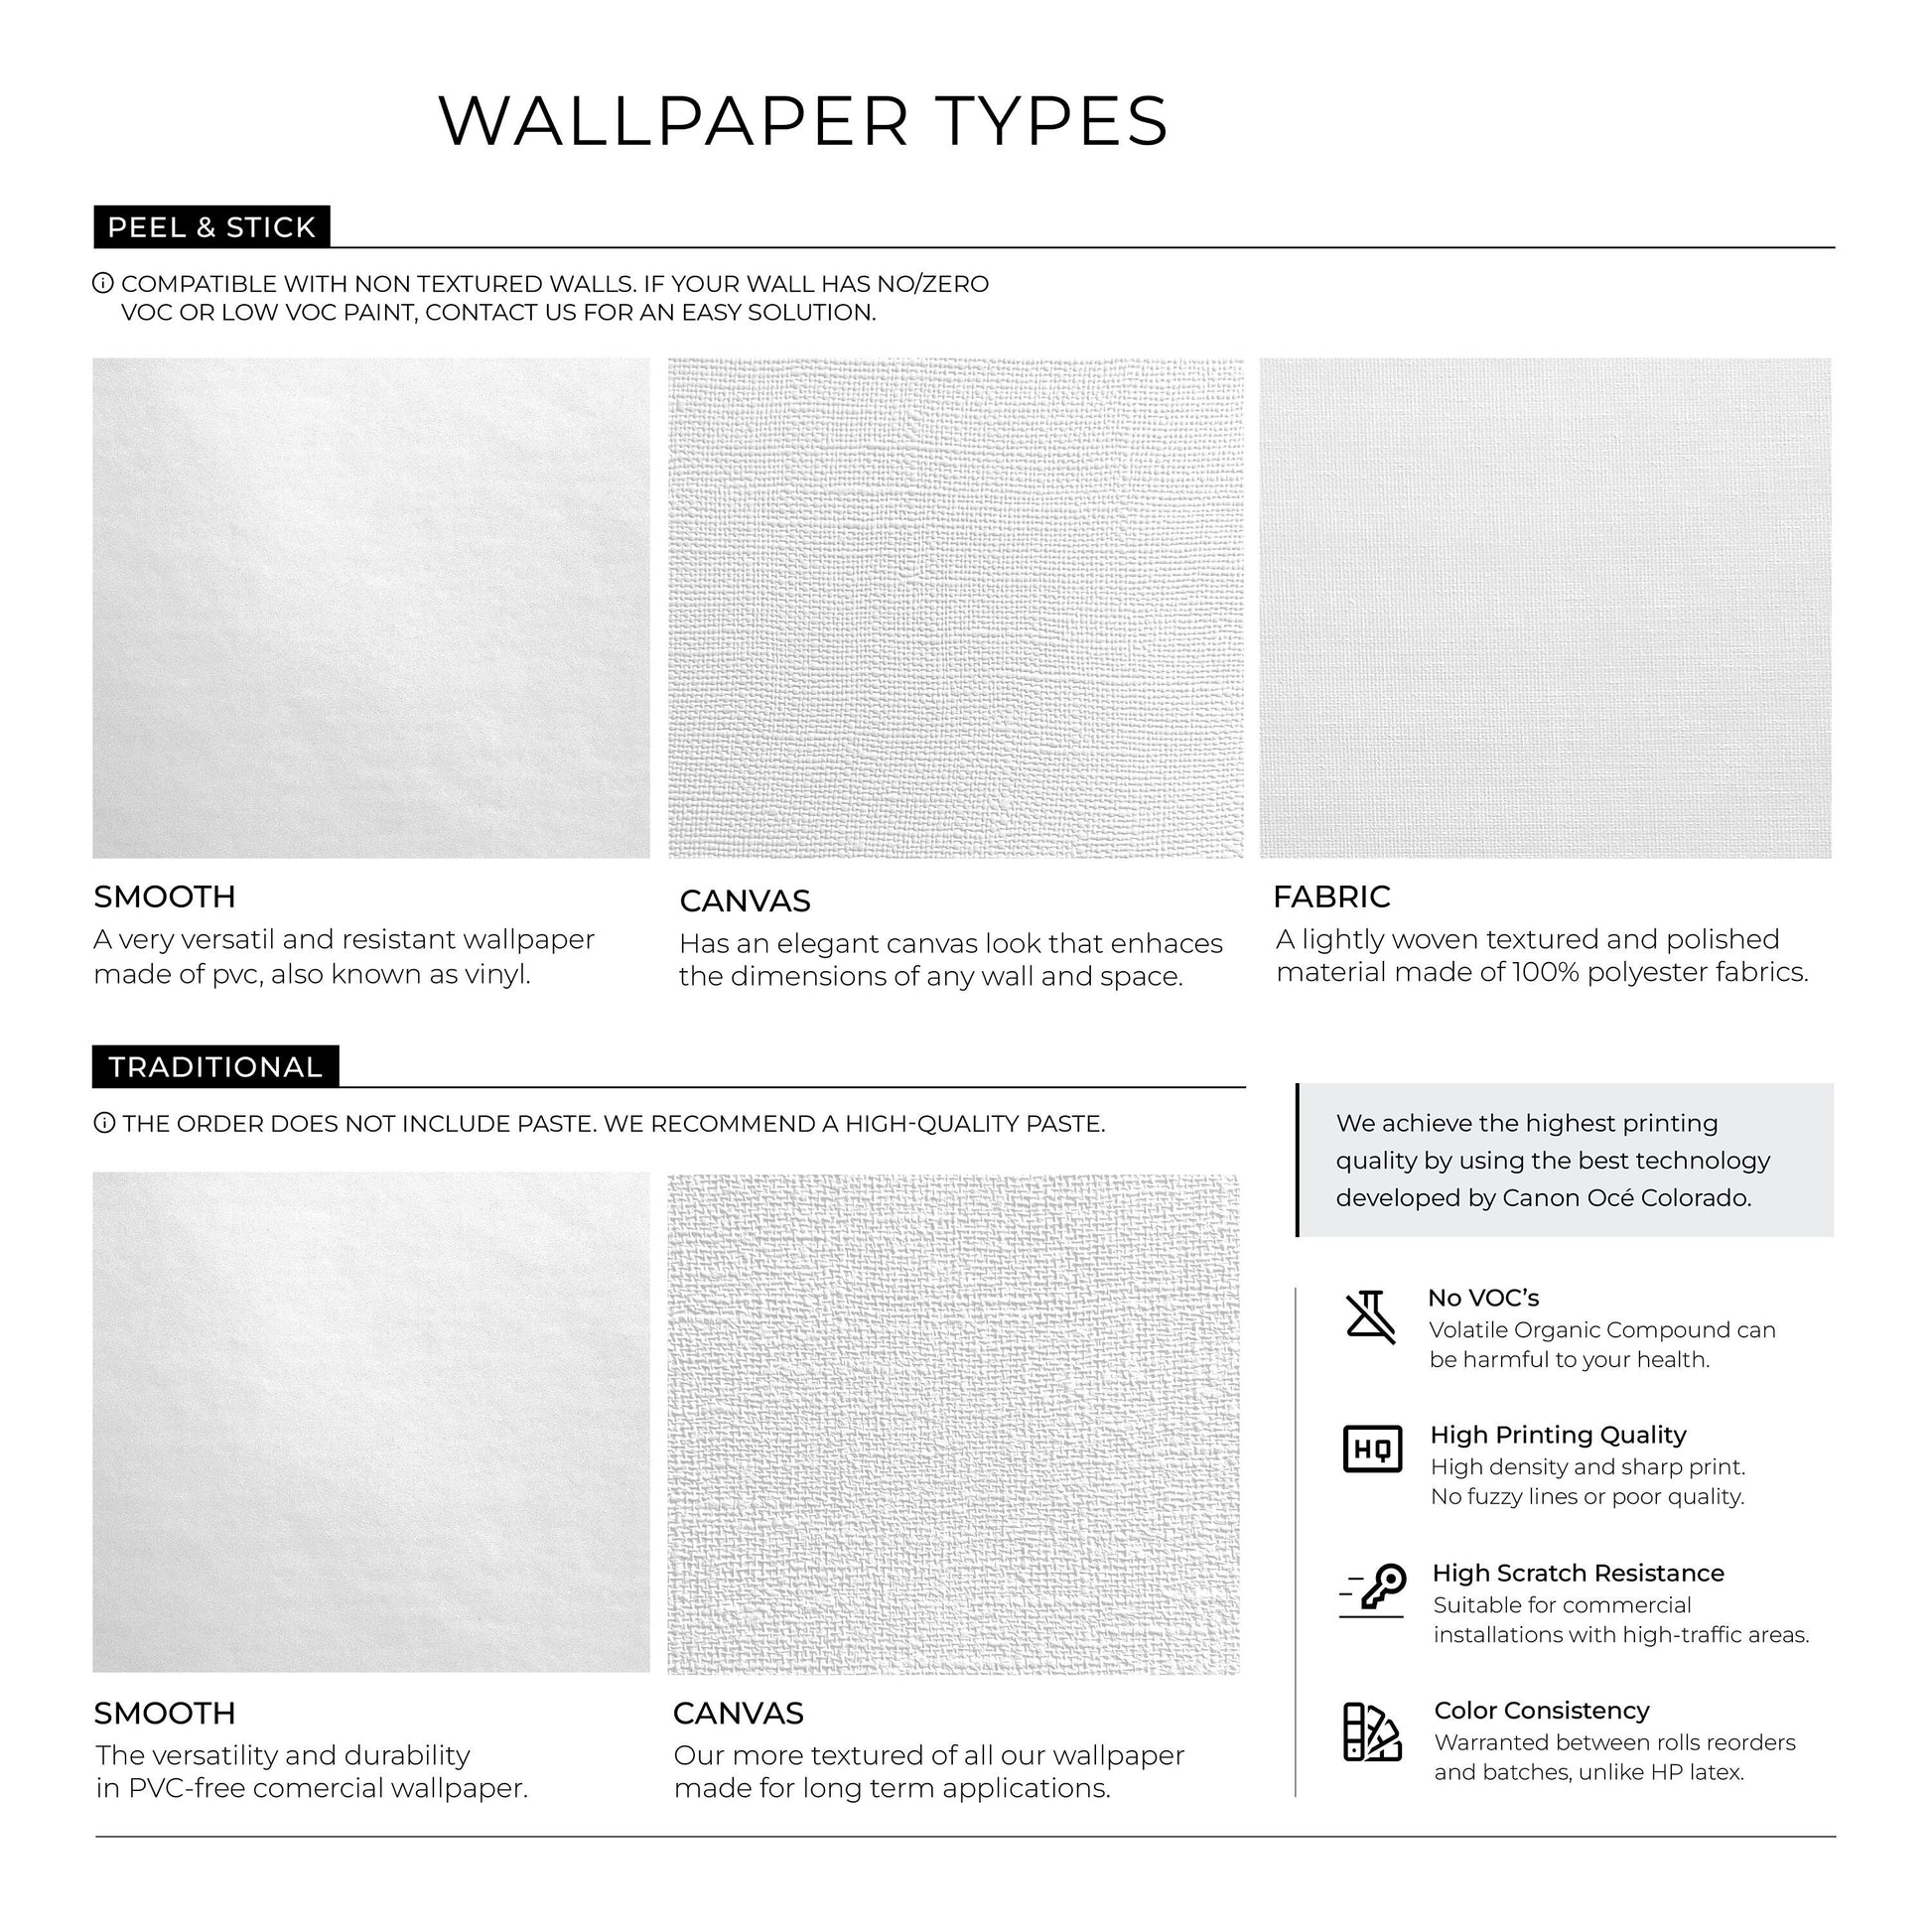 Removable Wallpaper Wall Temporary Wallpaper Nursery Wallpaper Wall Decor Wall Paper Removable Peel and Stick Wallpaper - A638